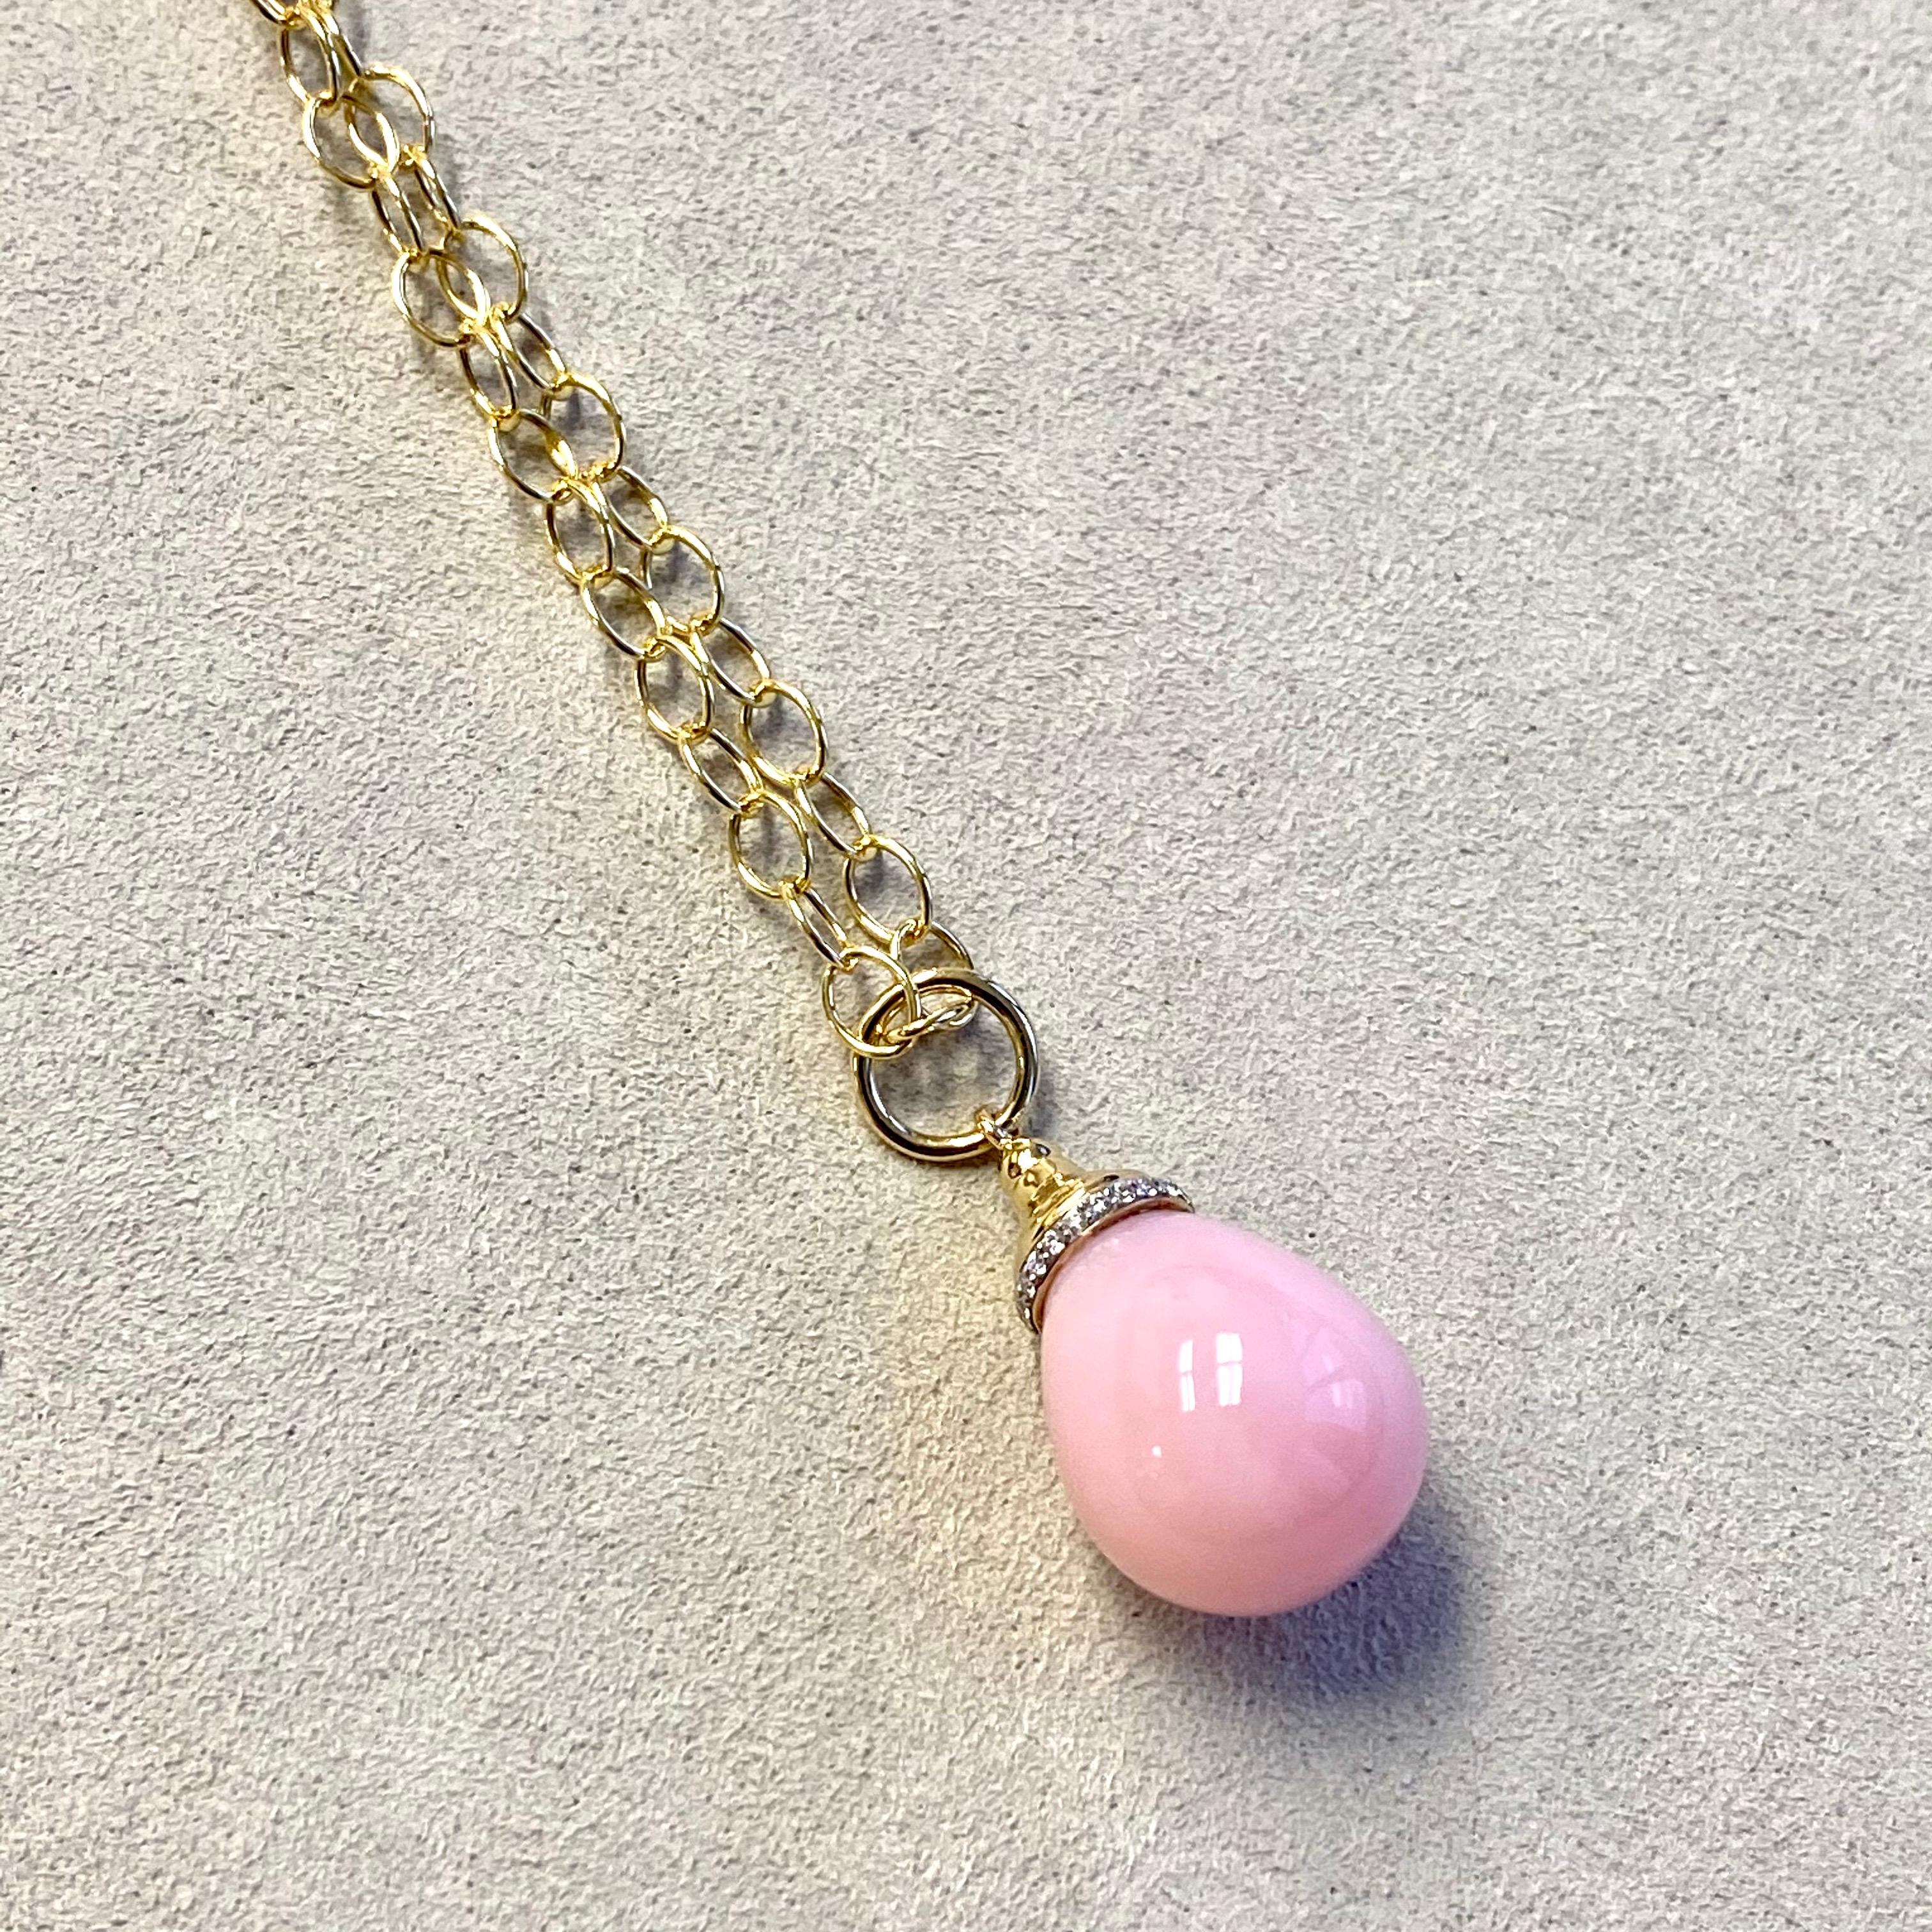 Created in 18 karat yellow gold 
Pink Opal 18 carats approx.
Diamonds 0.10 carat approx.
Chain sold separately

Fashioned from 18 karat yellow gold, this exquisite piece features a radiant pink opal of approximately 18 carats and an enchanting array